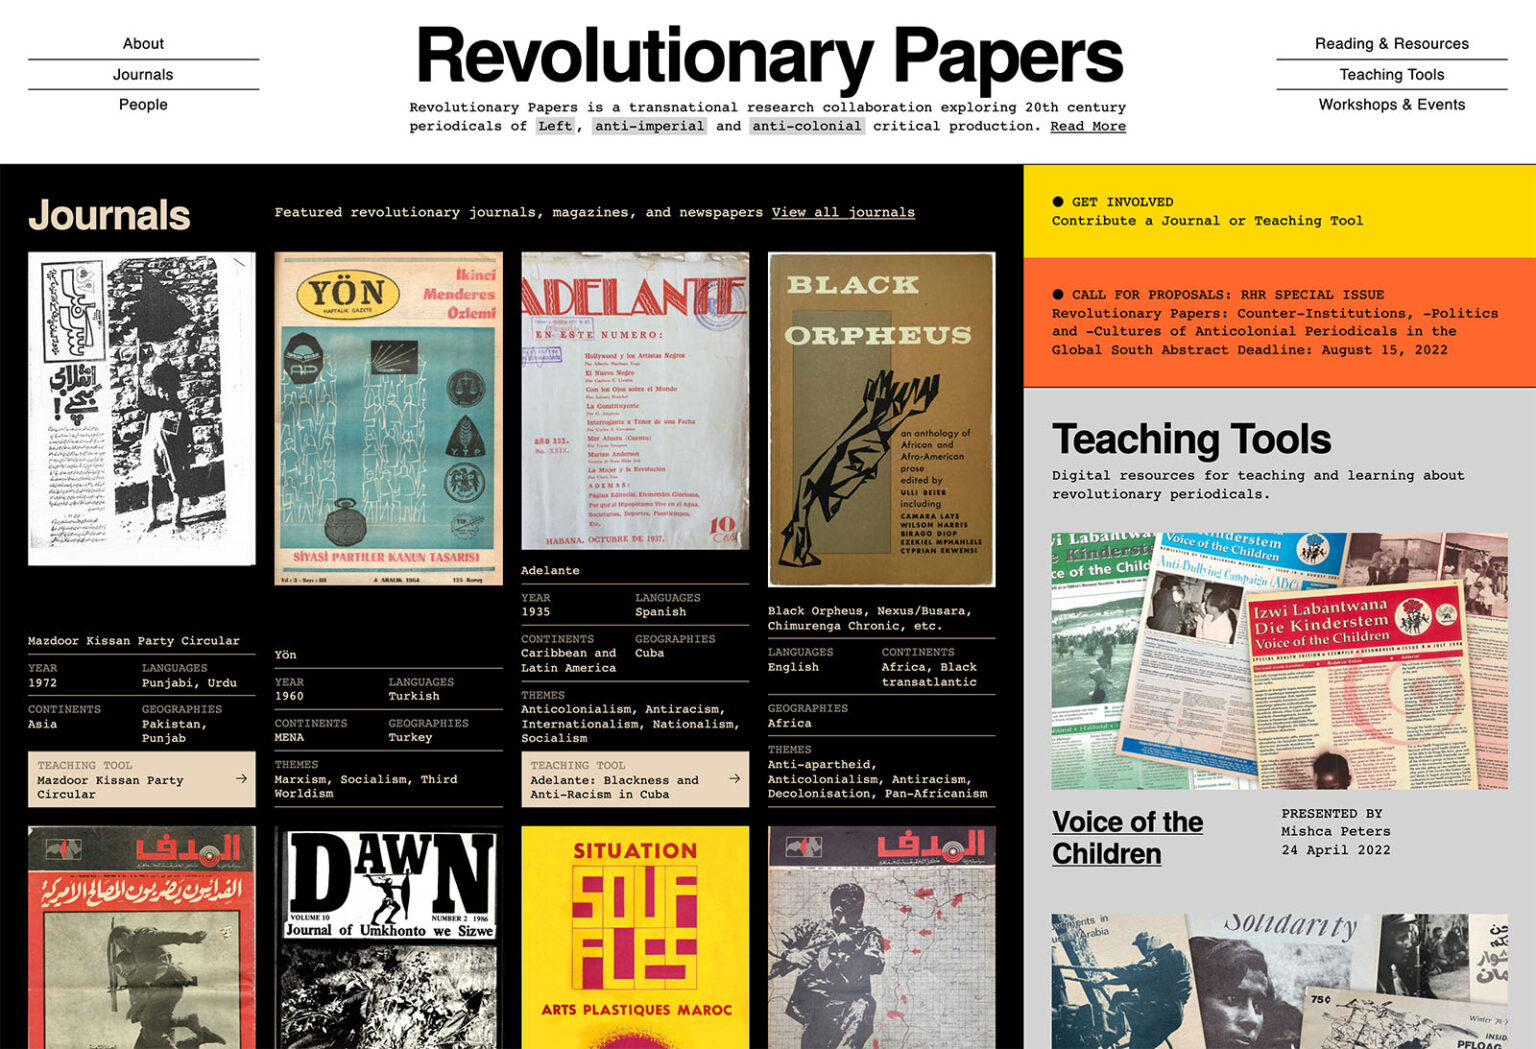 Revolutionary Papers home page showing a grid of journals in the main column, and announcements and teaching tools in a secondary column